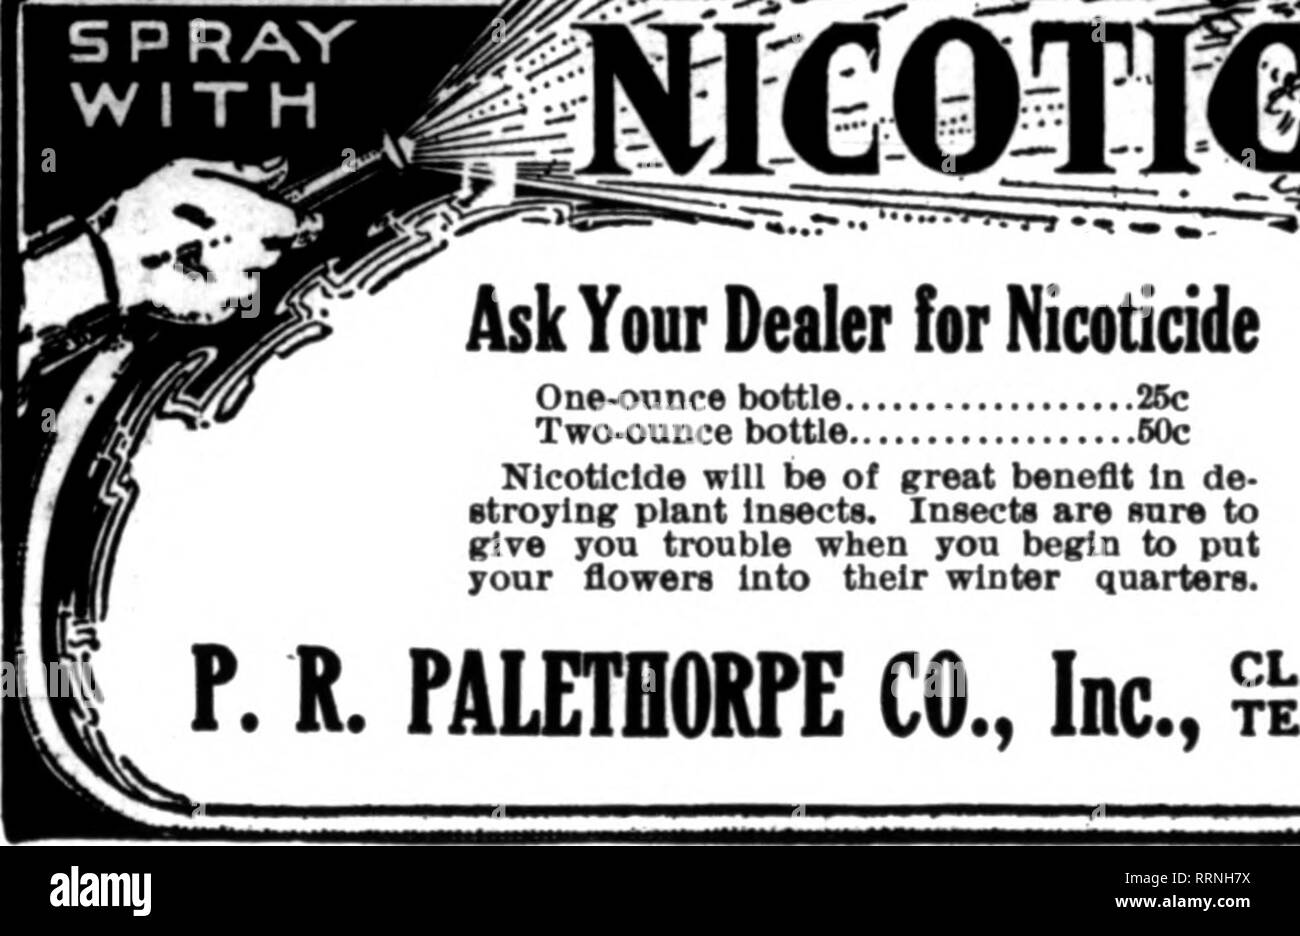 . Florists' review [microform]. Floriculture. / THE RECOGNIZED STANDARD INSECTICIDE. A spray remedy for green, black, white fly, thrlpa and soft scale. Quart. $1.00; Gallon, $2.60. FUNGINE An Infallible spray remedy for rose mildew, carnation and chrysanthemum rust. Quart, 76c; QaUon, $2.00. VERMINE A soil steriliser for cut. eel, wire and angle worms. Quart, $1.00; Gallon, $3.00. SCALINE For San Jose and various scale on trees and hardy stock. Quart, 76c: Gallon. $1.00. NIKOTIANA A 12 per cent nicotine solution properly diluted for fumigating or vaporizing. Quart, $1.60; Gallon, $1.60. If you Stock Photo